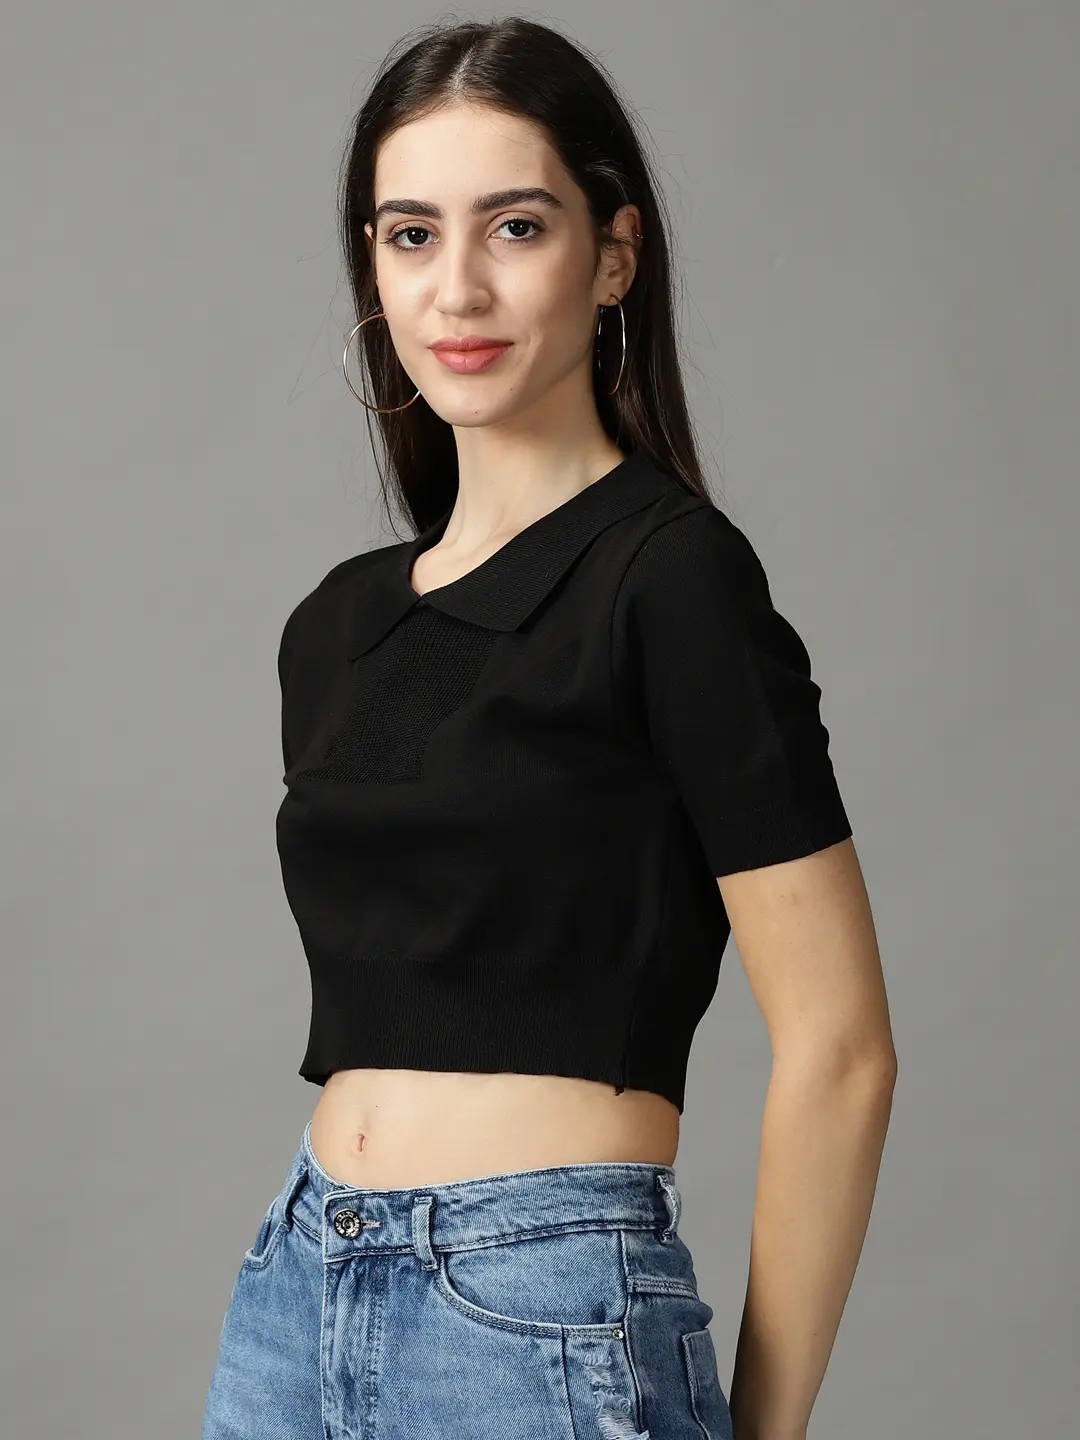 SHOWOFF Women's Shirt Collar Fitted Solid Black Crop Top